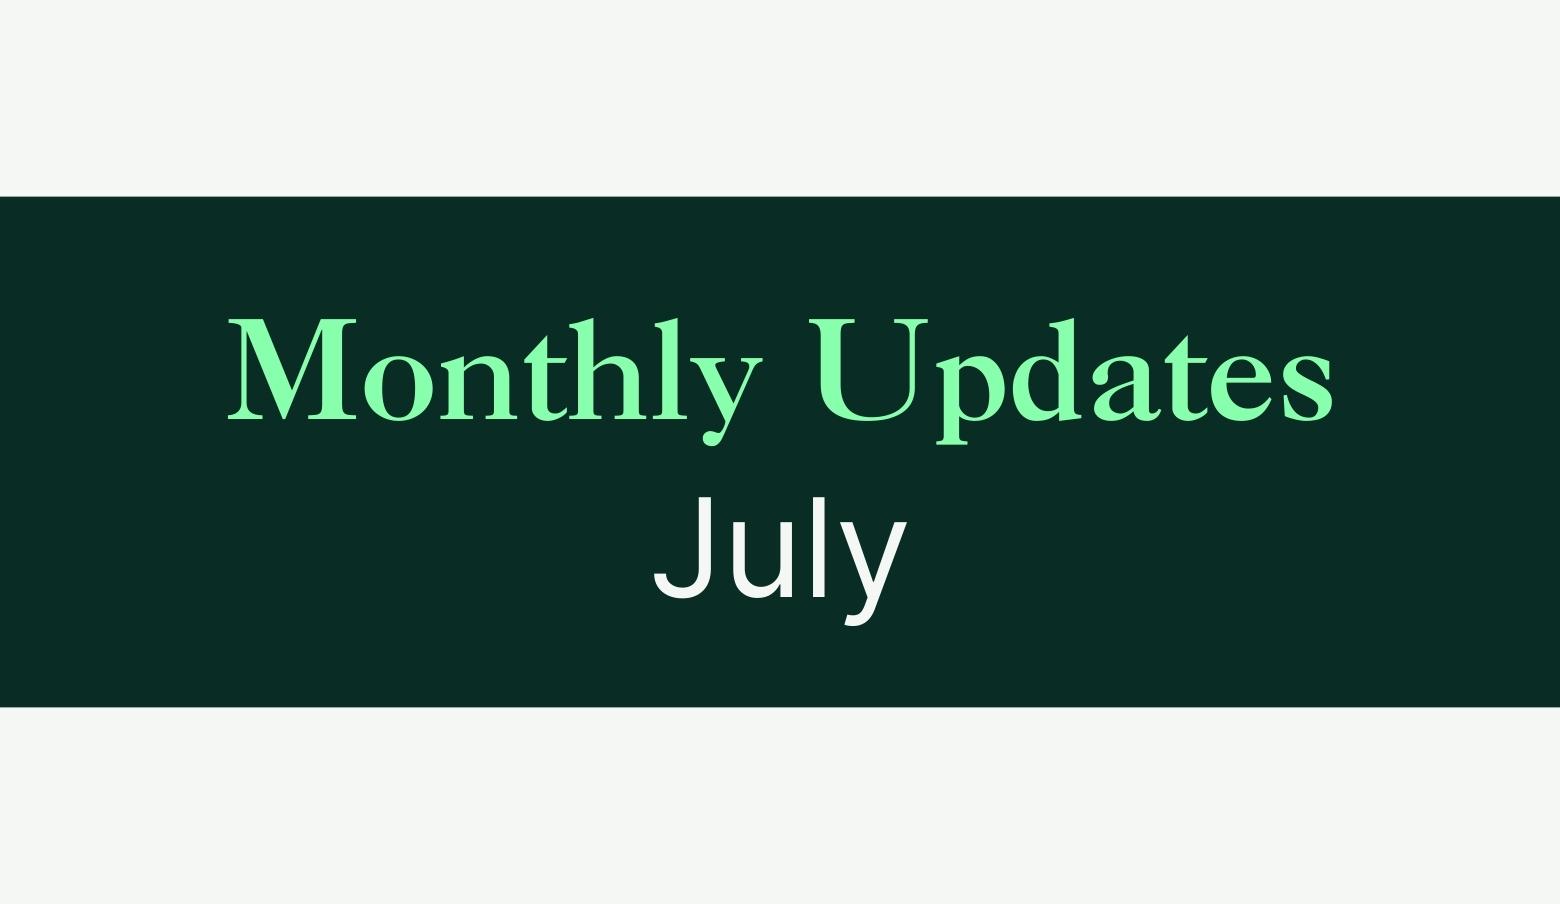 Monthly Updates July